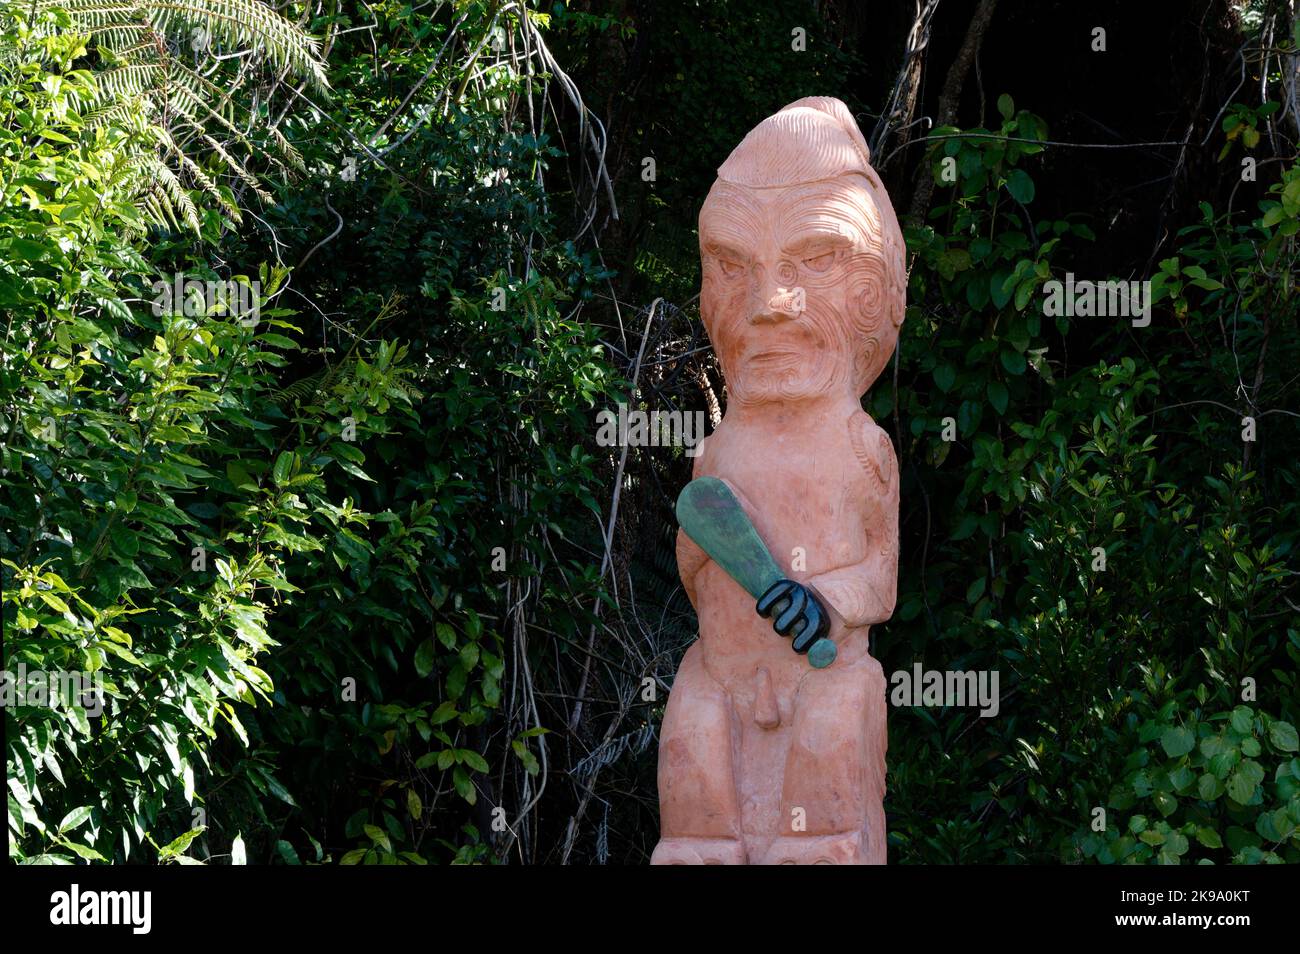 A Maori carving, Te Tana Pukekohatu at Bark Bay in the Abel Tasman National Park. He is holding a patu or mere depending on what it is made from. It w Stock Photo